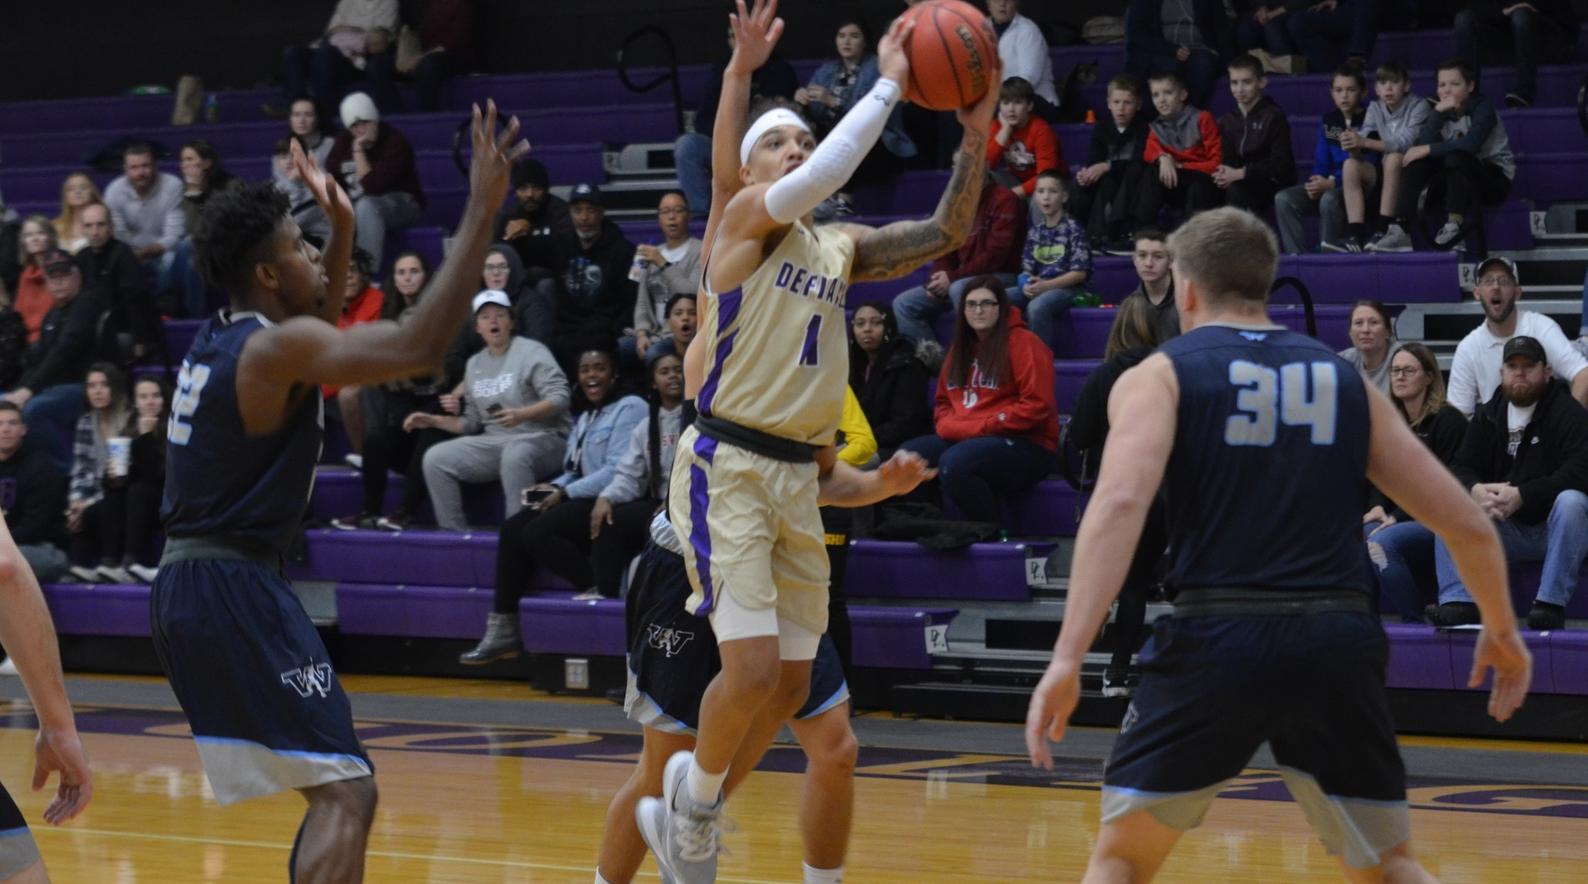 Men’s basketball opens 2019-20 regular season with dramatic one-point win